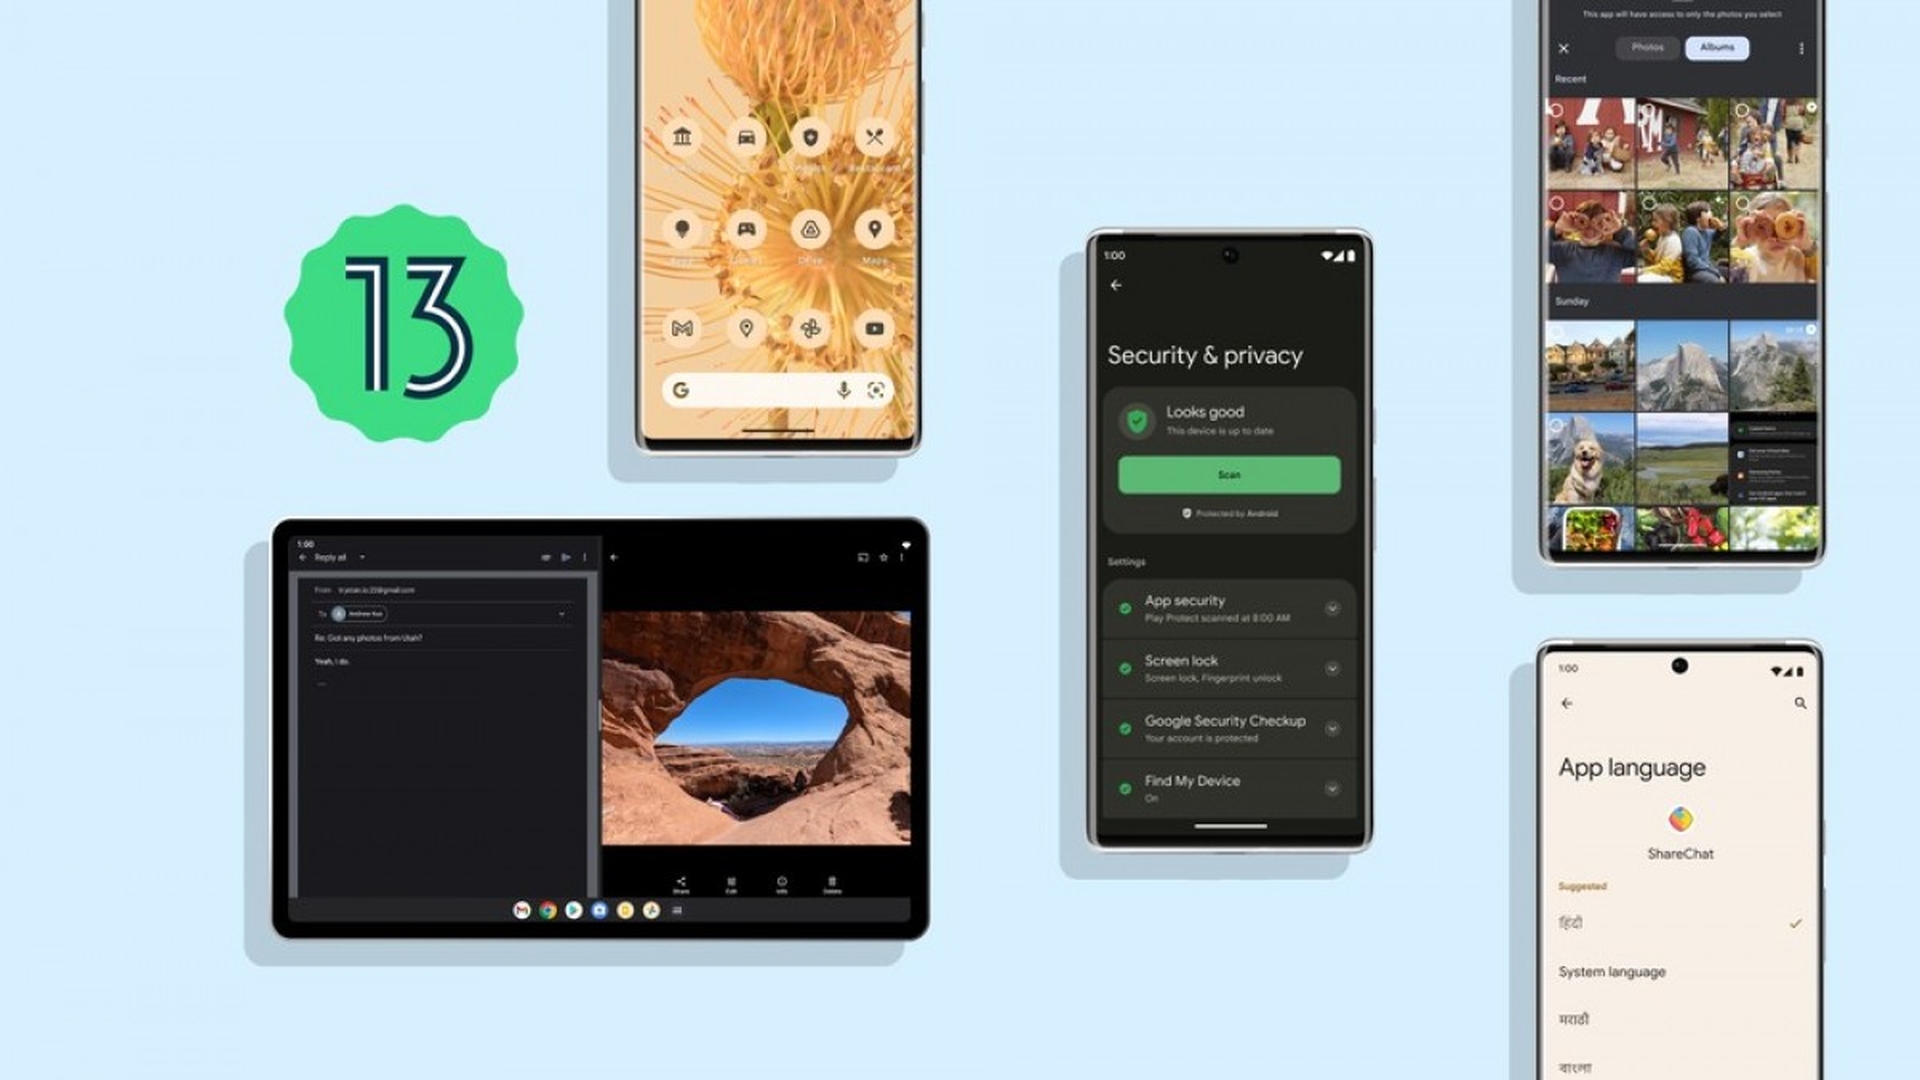 With both WWDC 2022 and Google I/O over, let's take a look at the new versions of the OSs and how they compare in our iOS 16 vs Android 13 comparison.